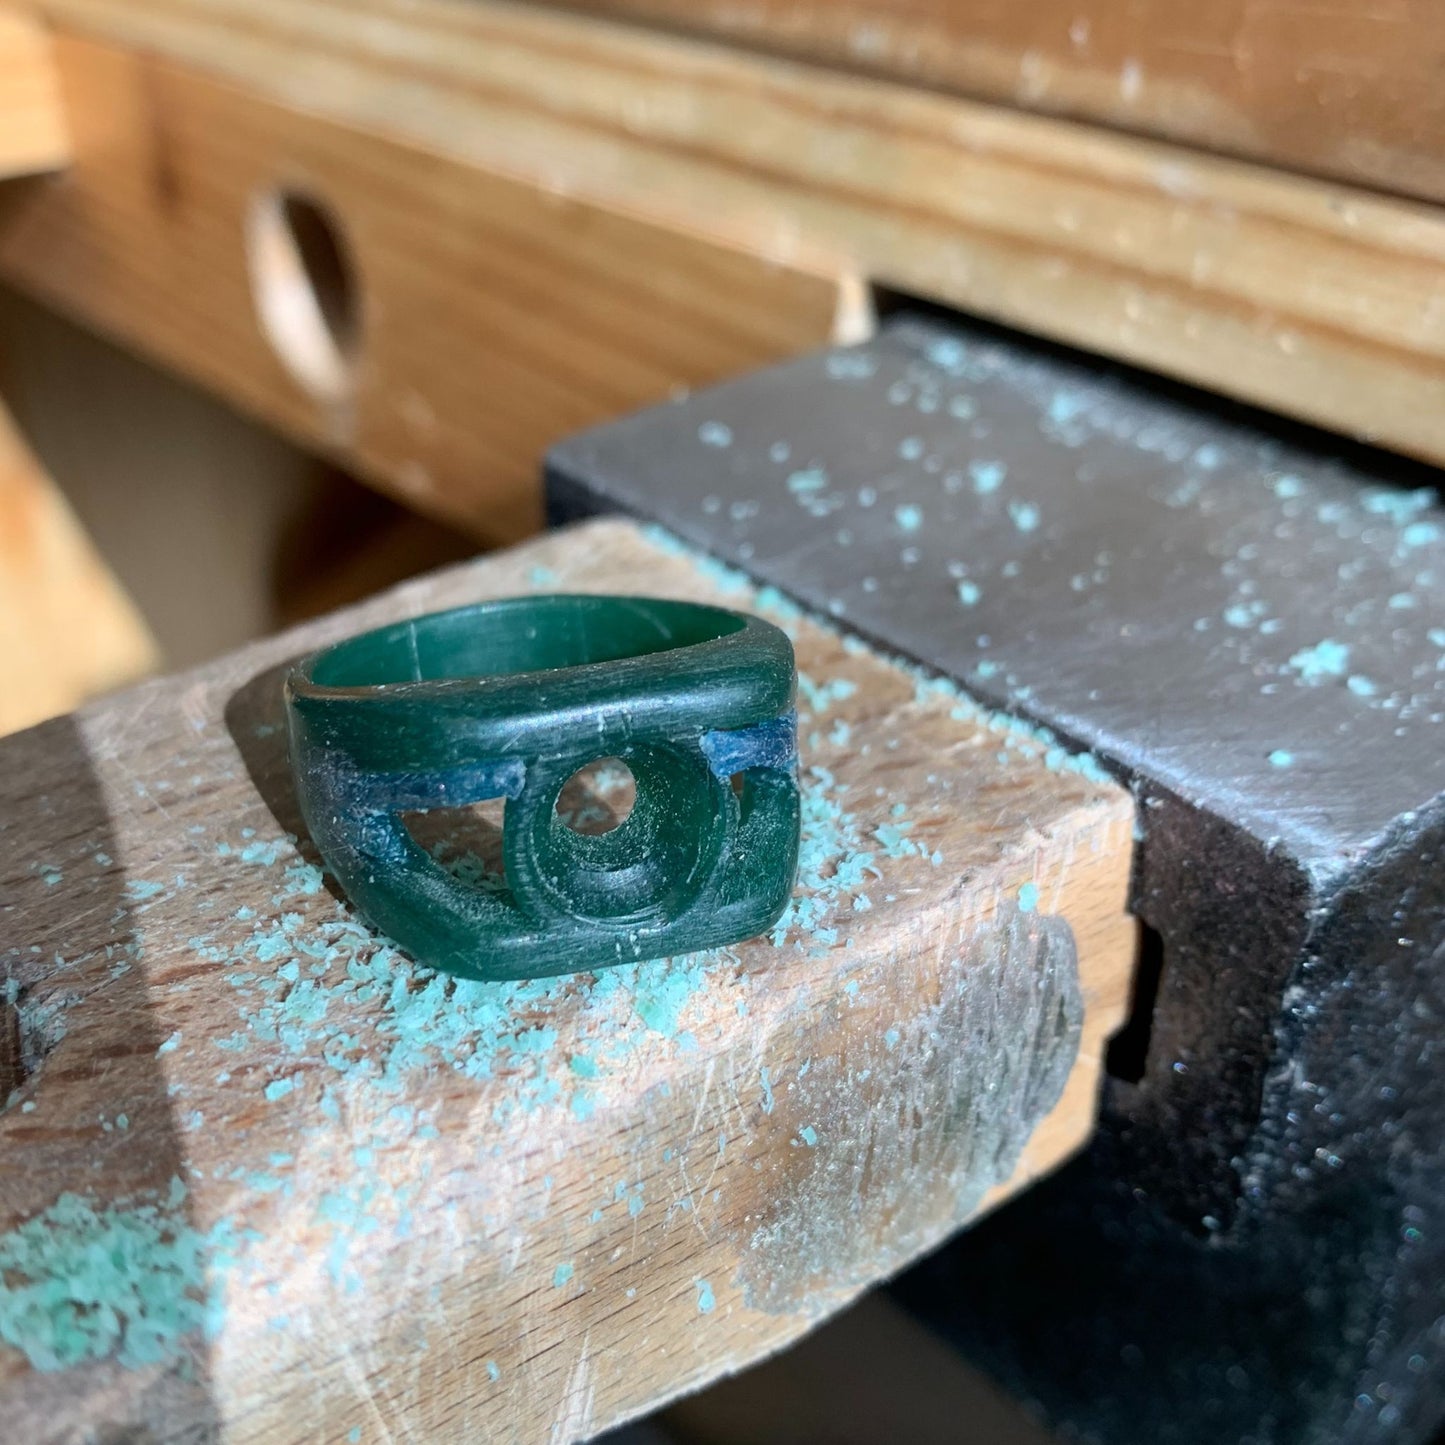 Wax carved ring ready to be cast